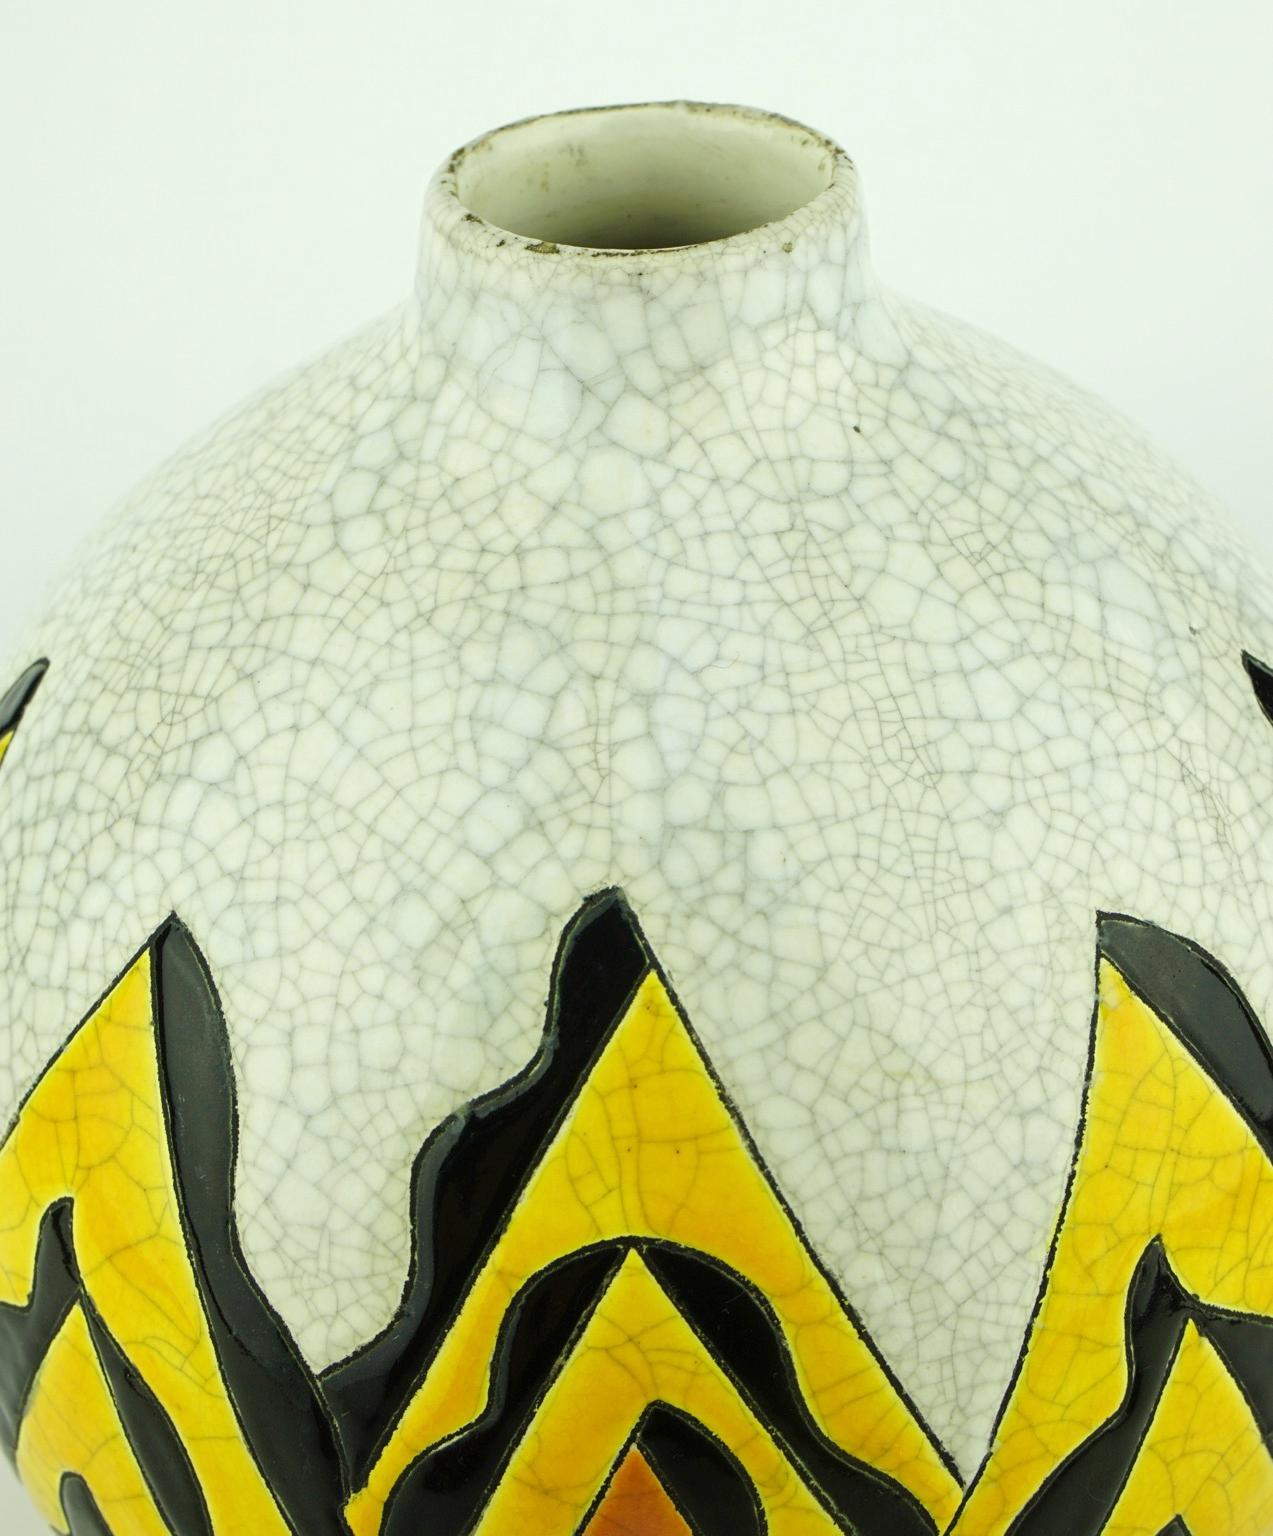 The design of this abstract Art Deco vase evoques perhaps volcanos. An example of Avant Garde in Art Deco ceramics. Marks: D 1209.

Material: Crackled enamel on earthenware.